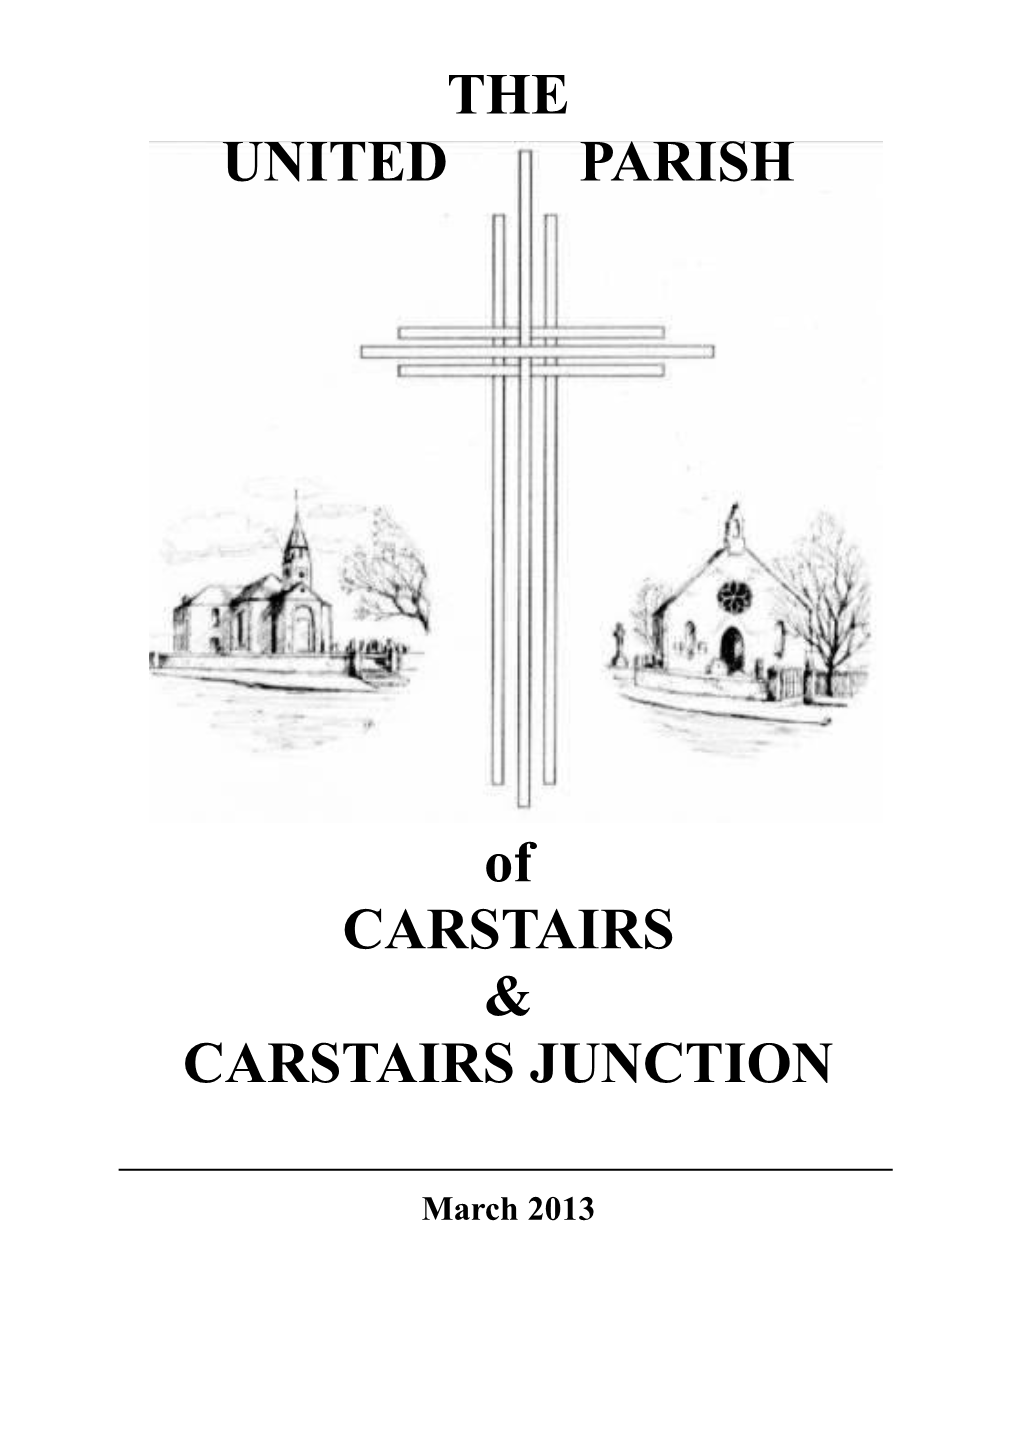 Carstairs Junction